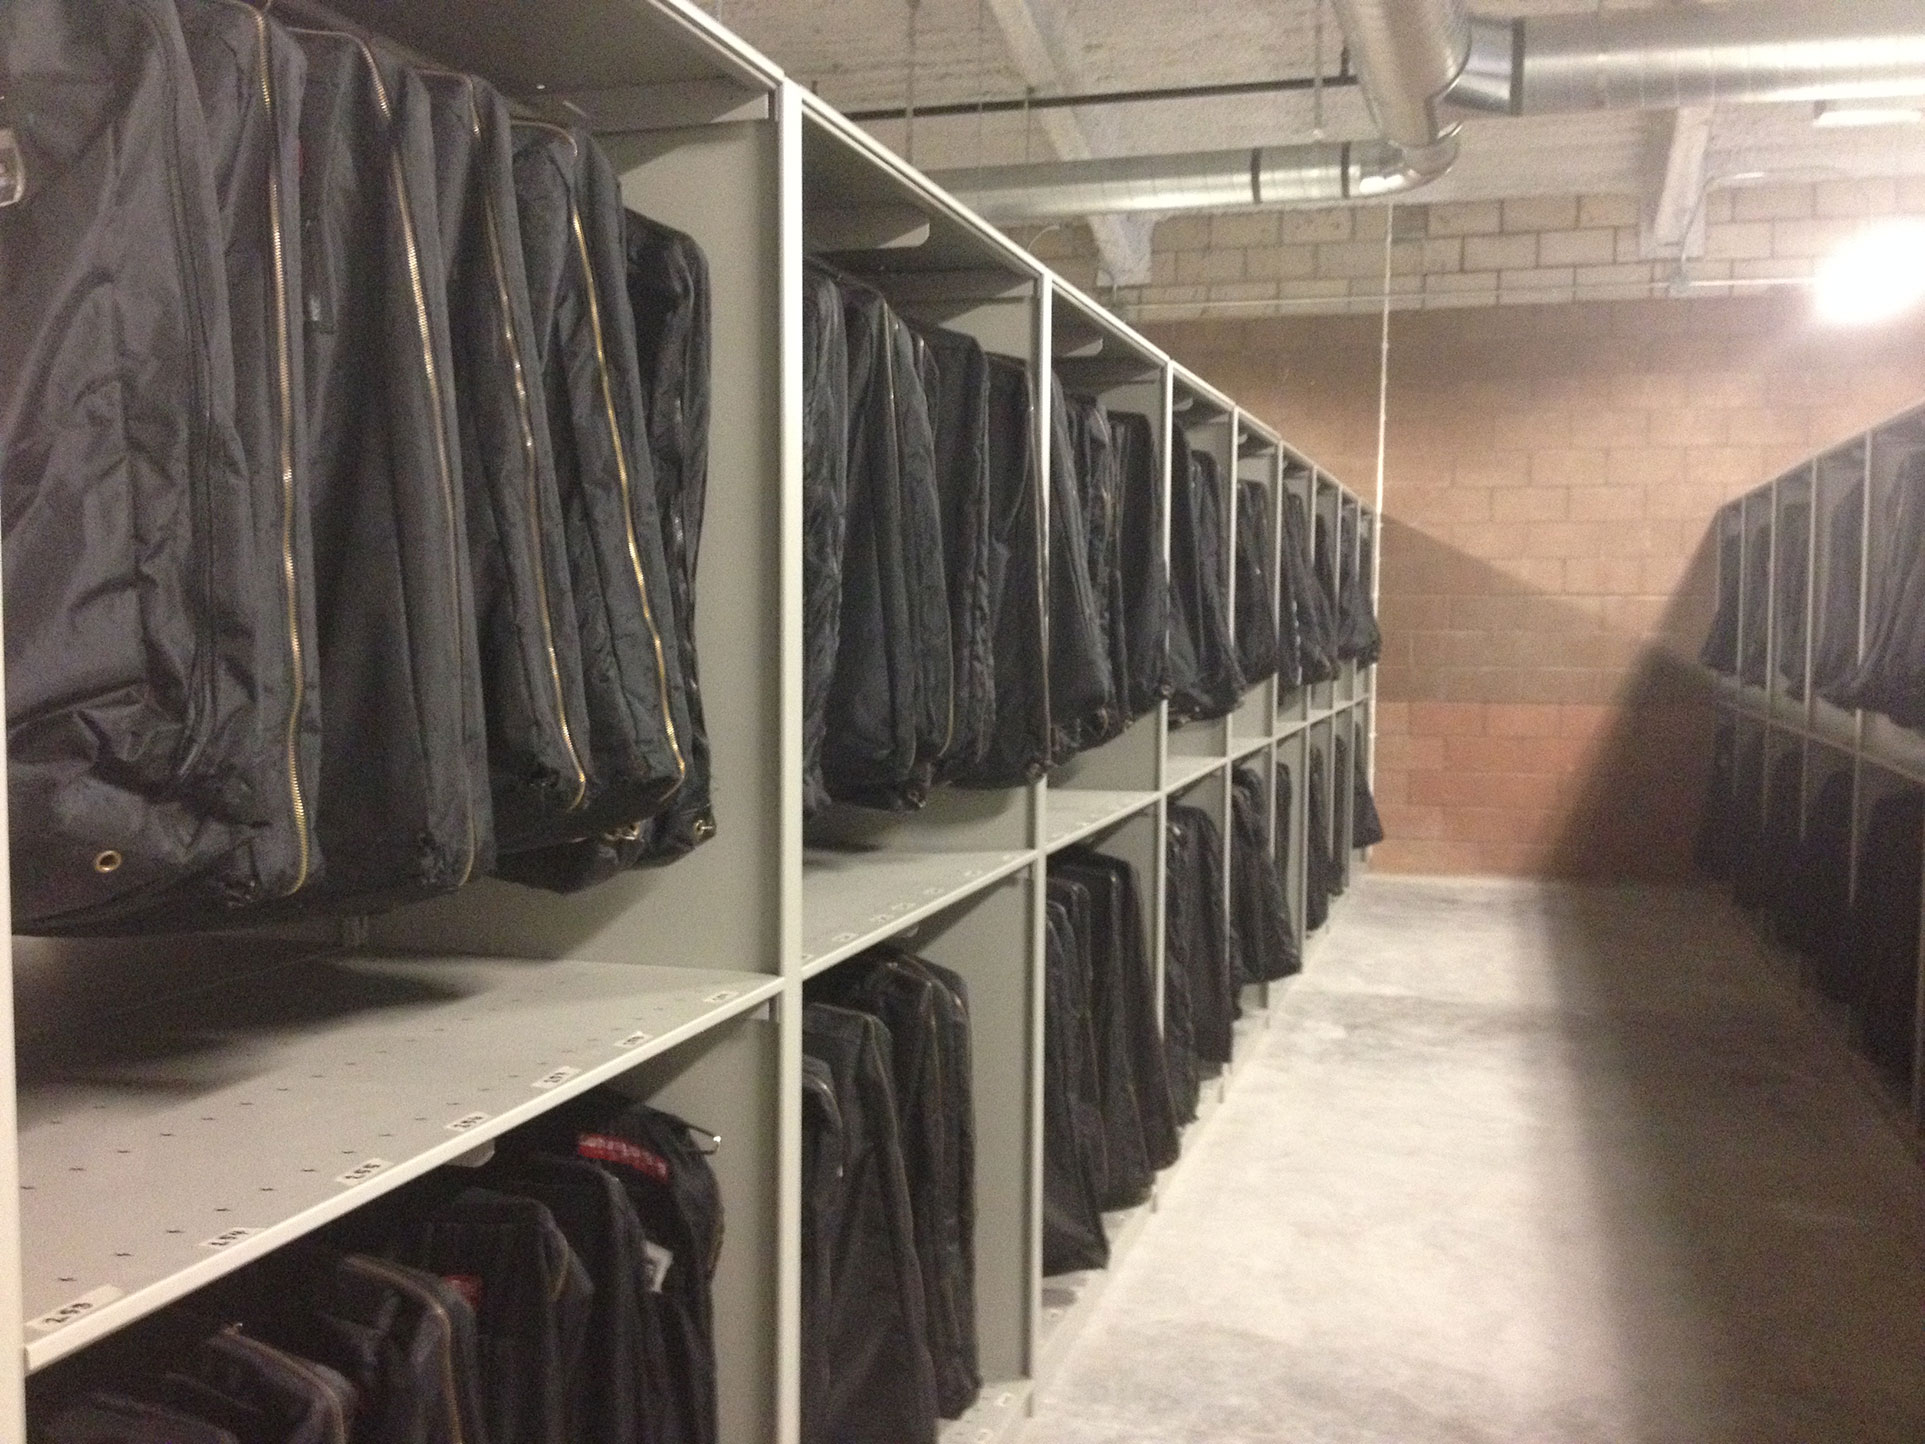 Inmate Property Storage Solved for East Mesa Reentry Facility